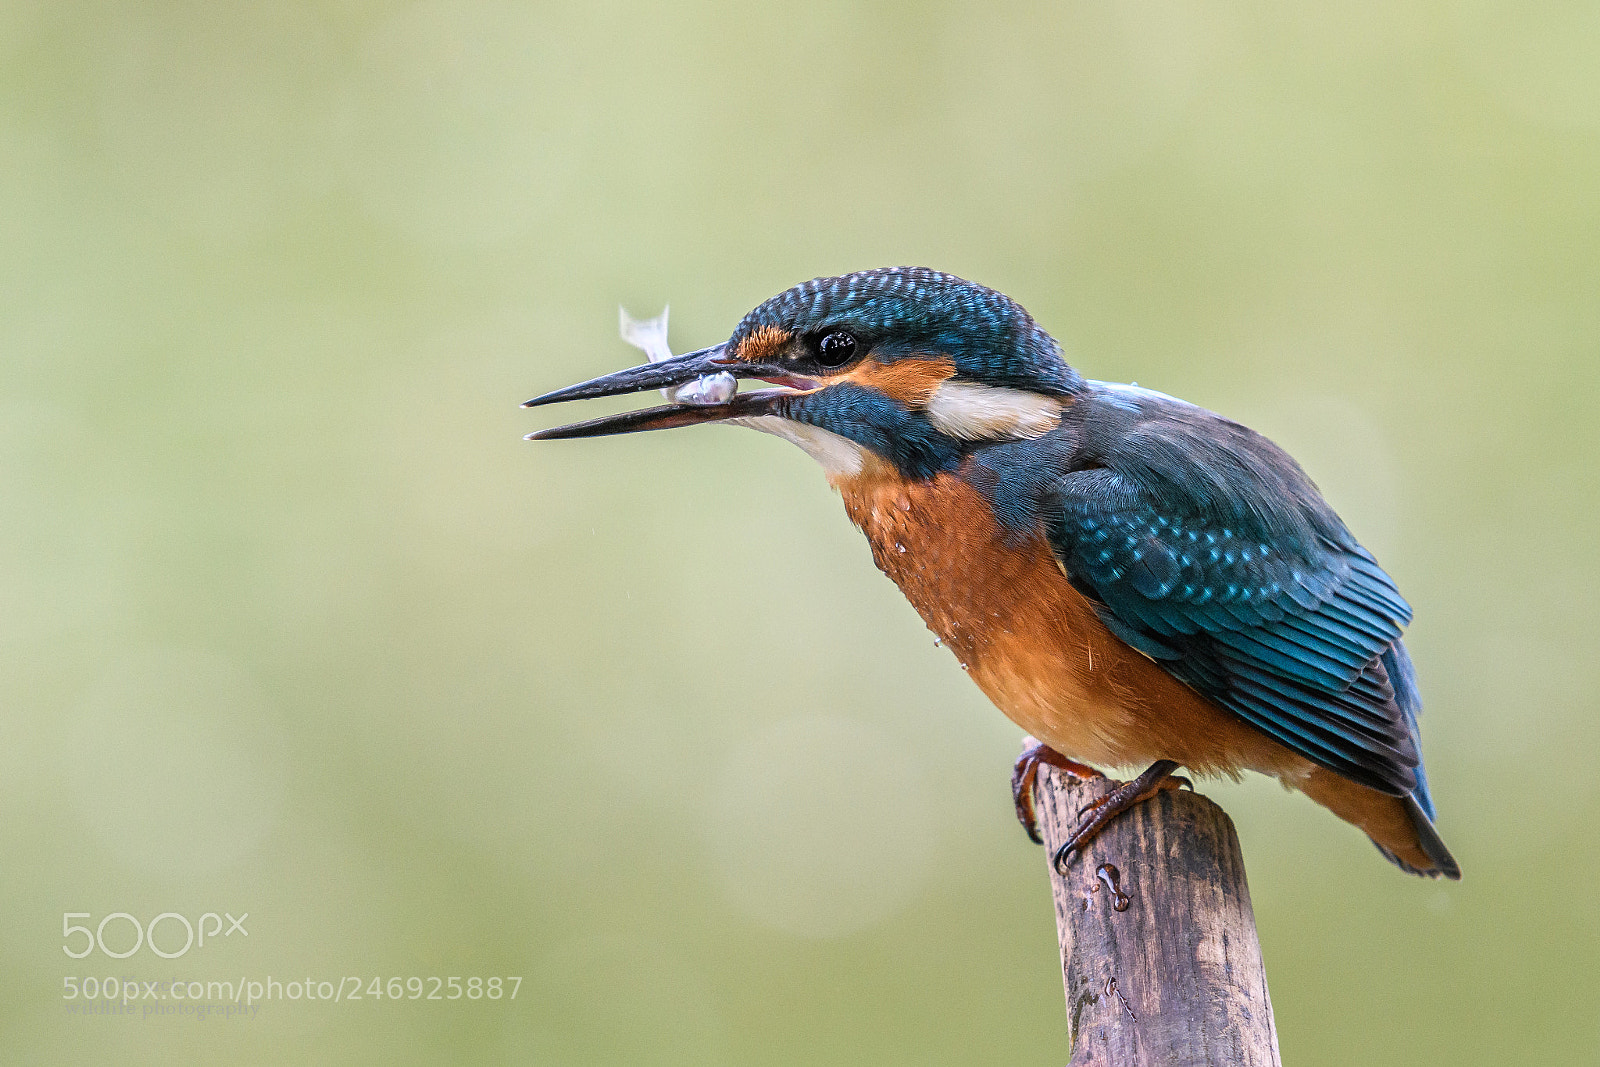 Nikon D500 sample photo. A kingfisher (alcedo atthis) photography